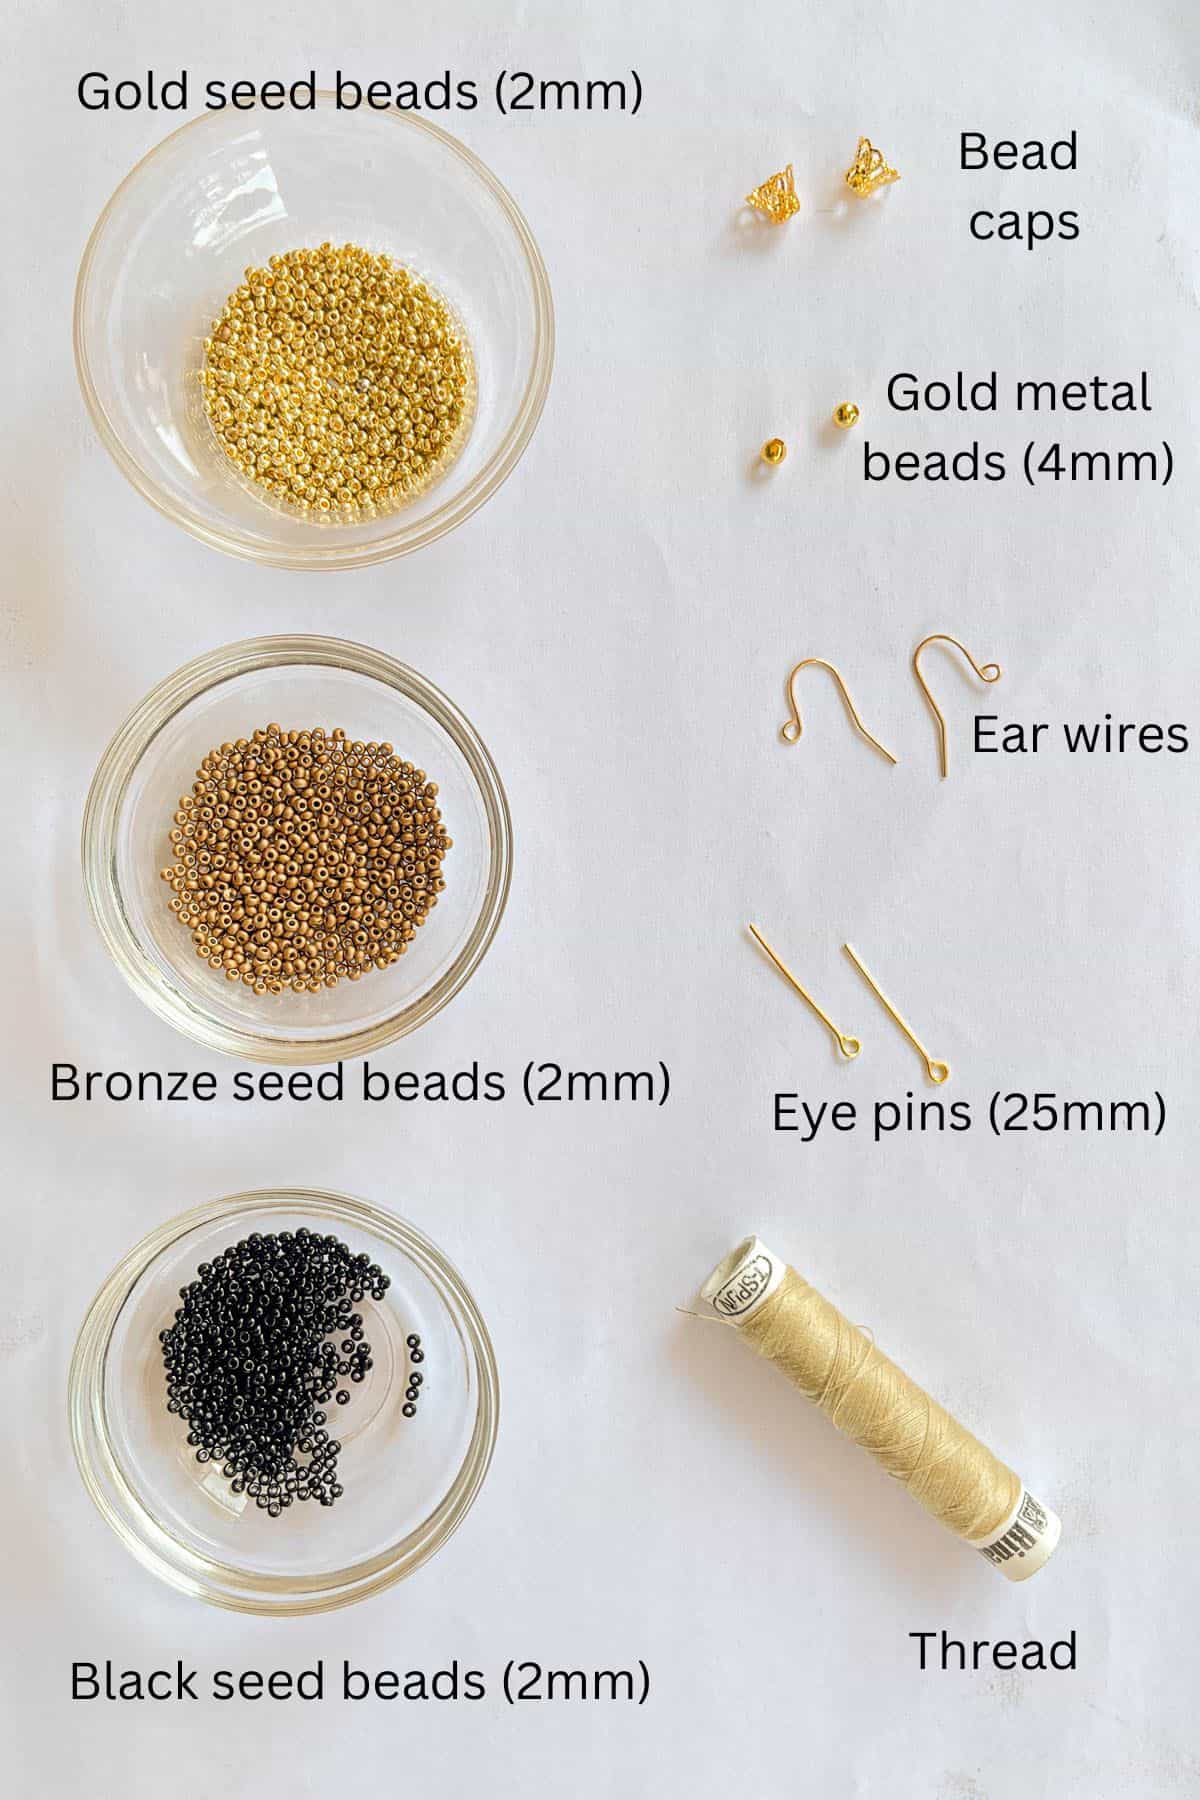 Gold, bronze and black seed beads, bead caps, gold beads, ear wires, eye pins and thread against marble background.